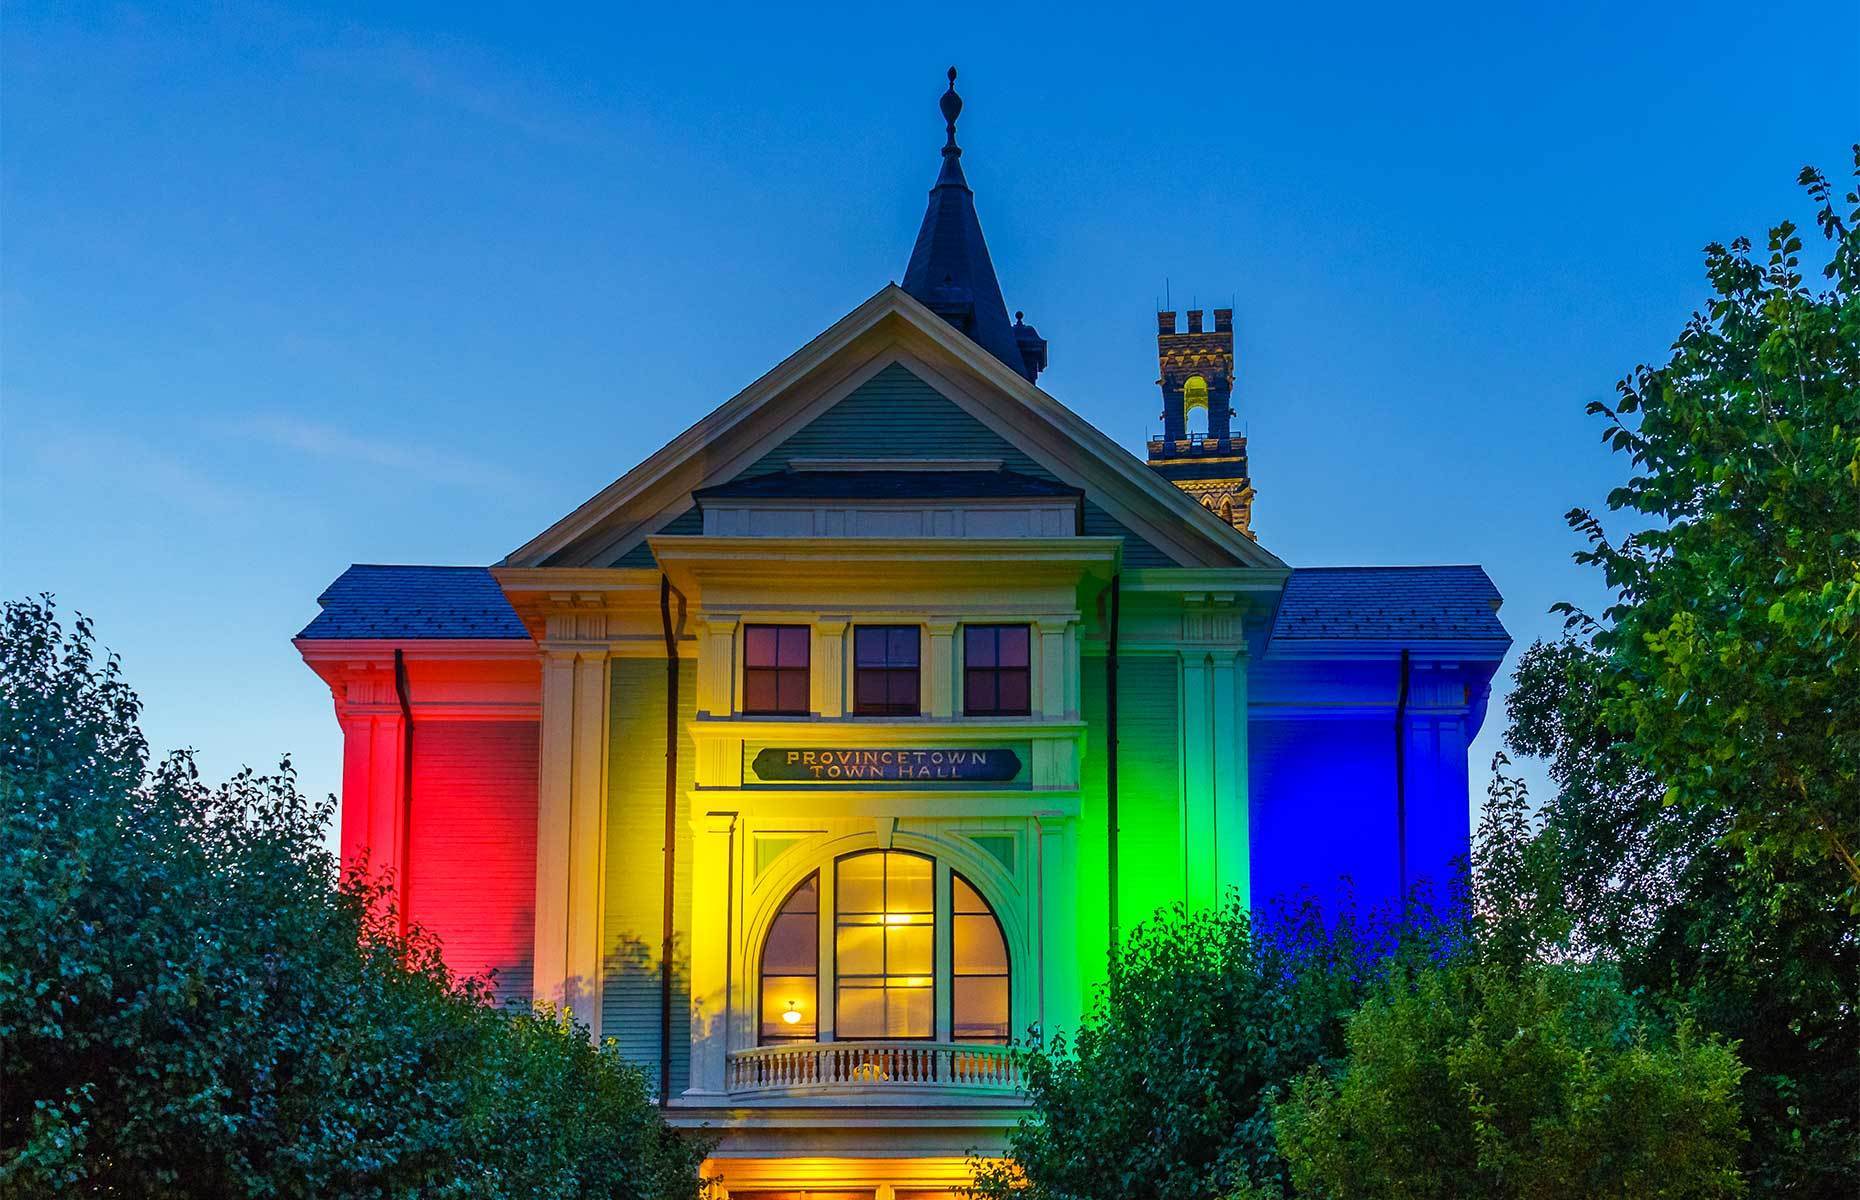 <p class="p1"><span>For the past several years, Provincetown has proudly claimed to be among <a href="https://www.visit-provincetown.com/ptown-lgbt-friendly-2/" rel="noreferrer noopener"><span>the most LGBT-friendly places</span></a>. Its history is marked by tolerance, harmony, and open-mindedness. Provincetown sits at the tip of Cape Cod.</span></p>